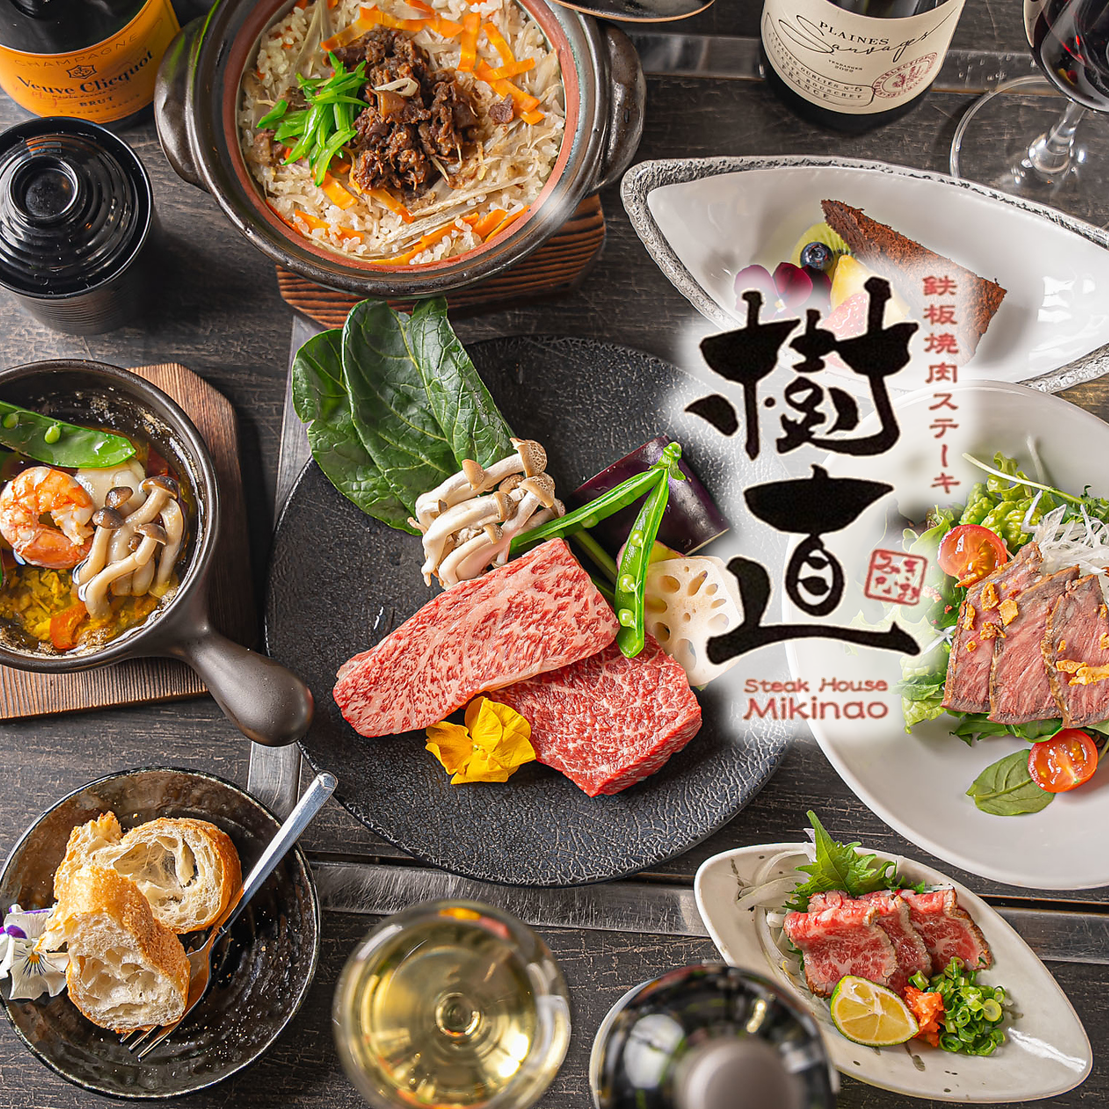 Enjoy Kobe beef grilled right in front of your eyes in a relaxing retreat for adults.